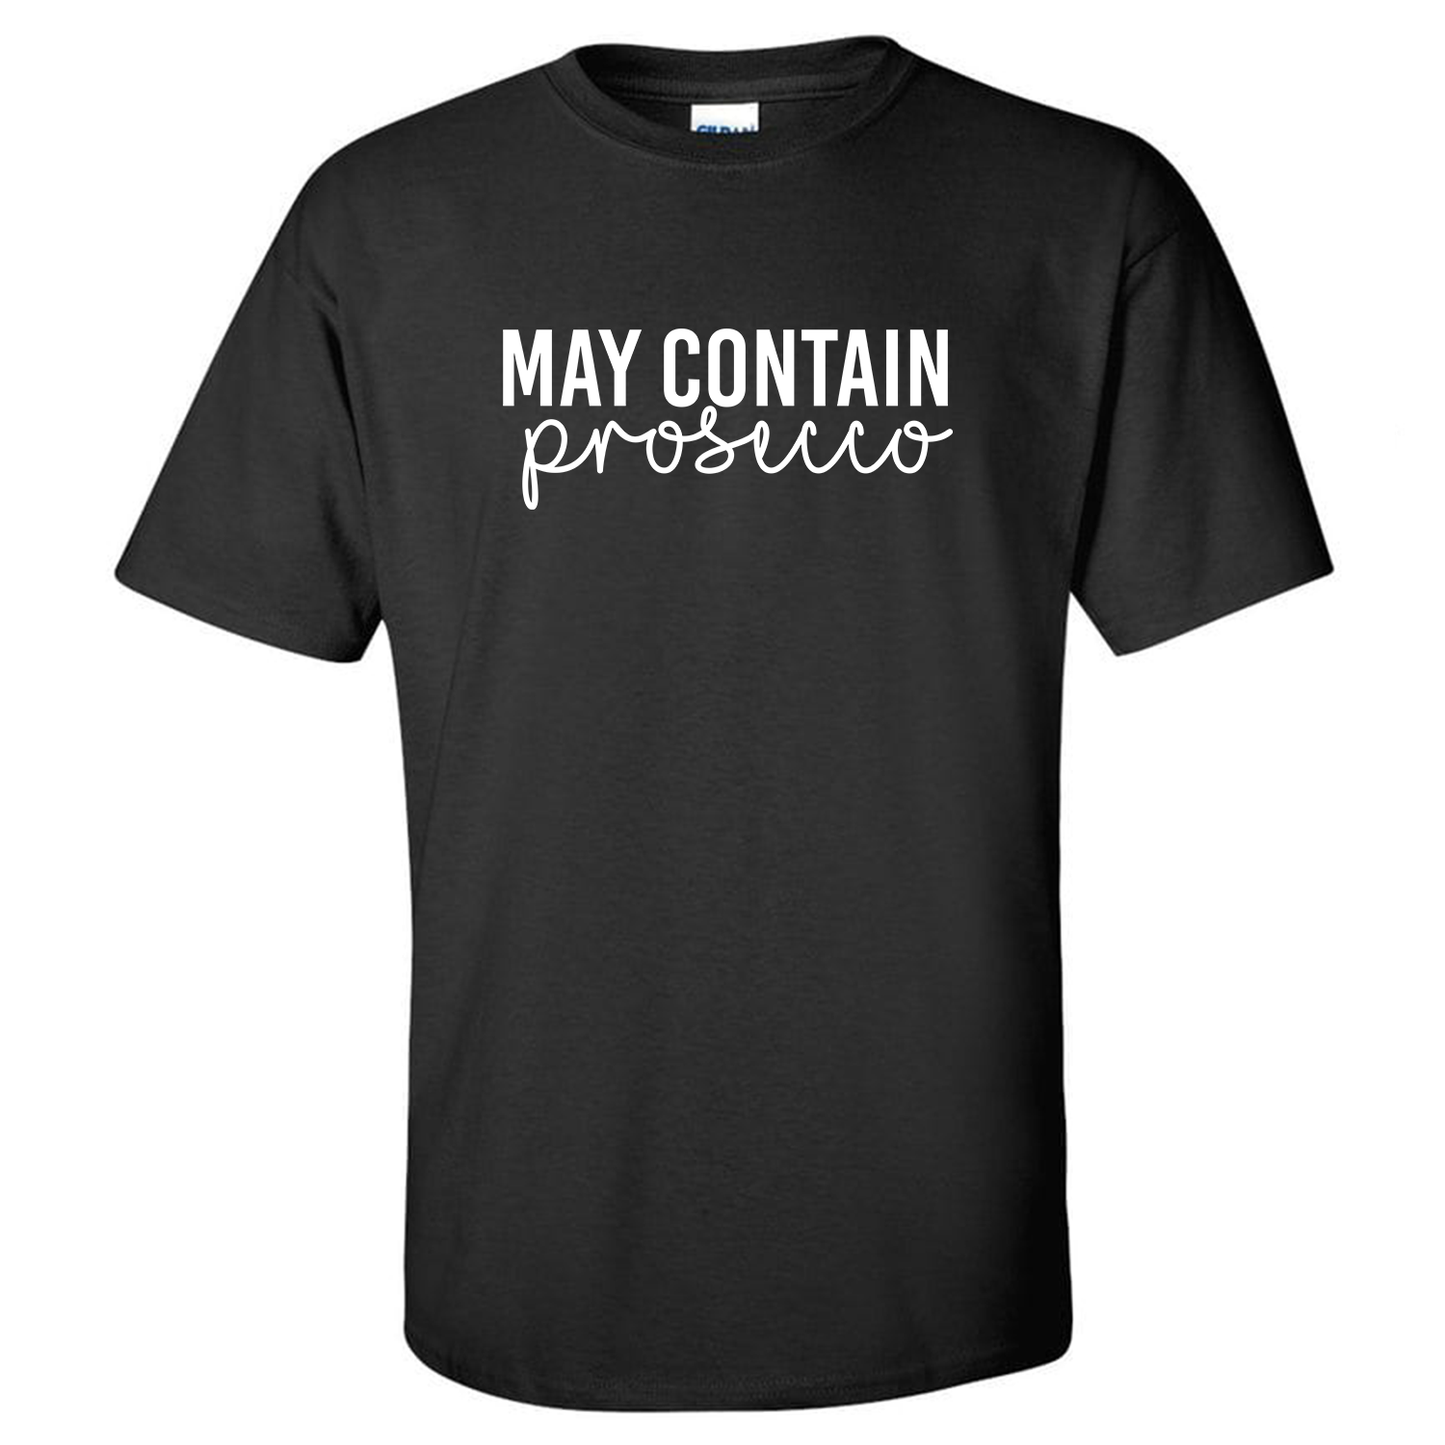 May Contain Prosecco Tee